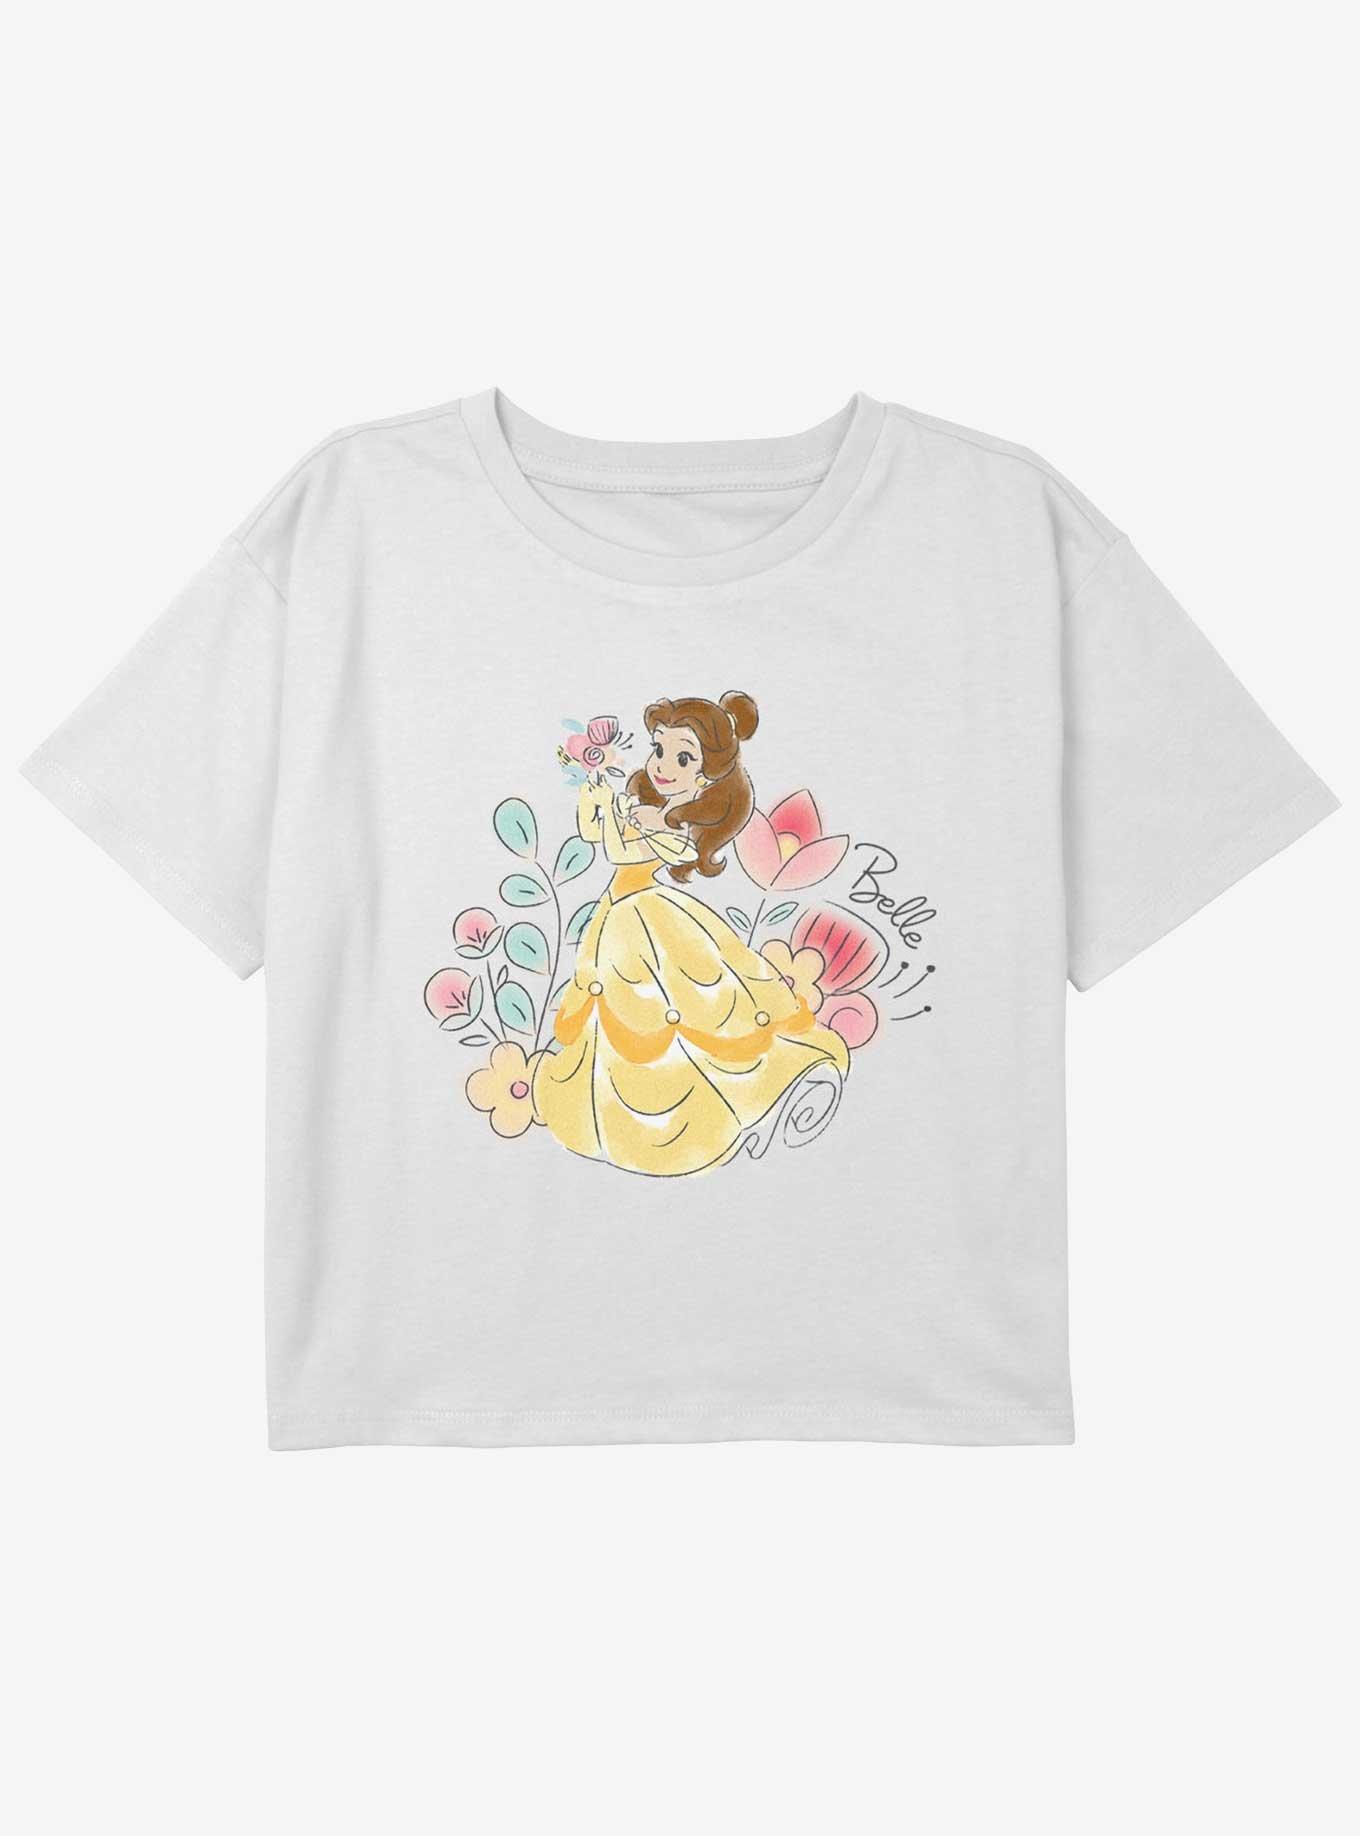 Disney Princesses Cute Belle With Flowers Youth Girls Boxy Crop T-Shirt, WHITE, hi-res